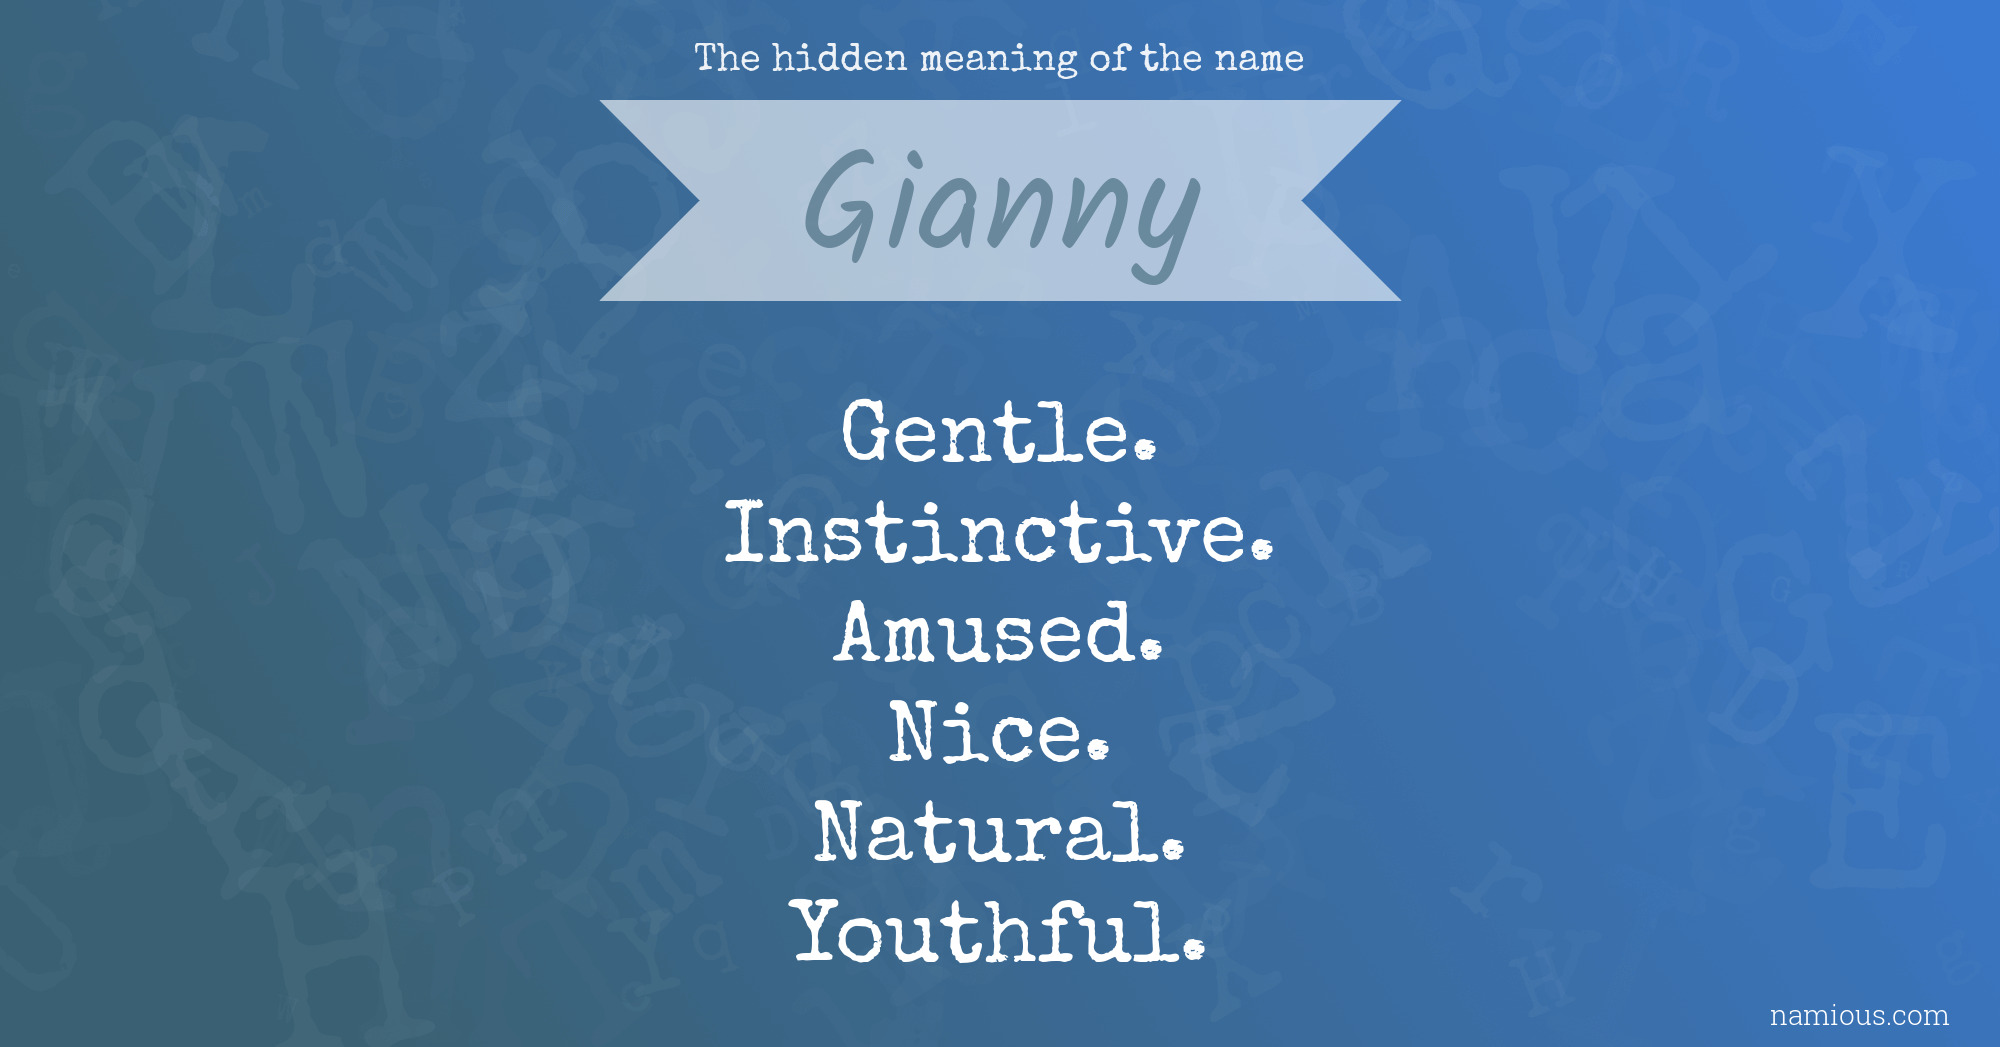 The hidden meaning of the name Gianny